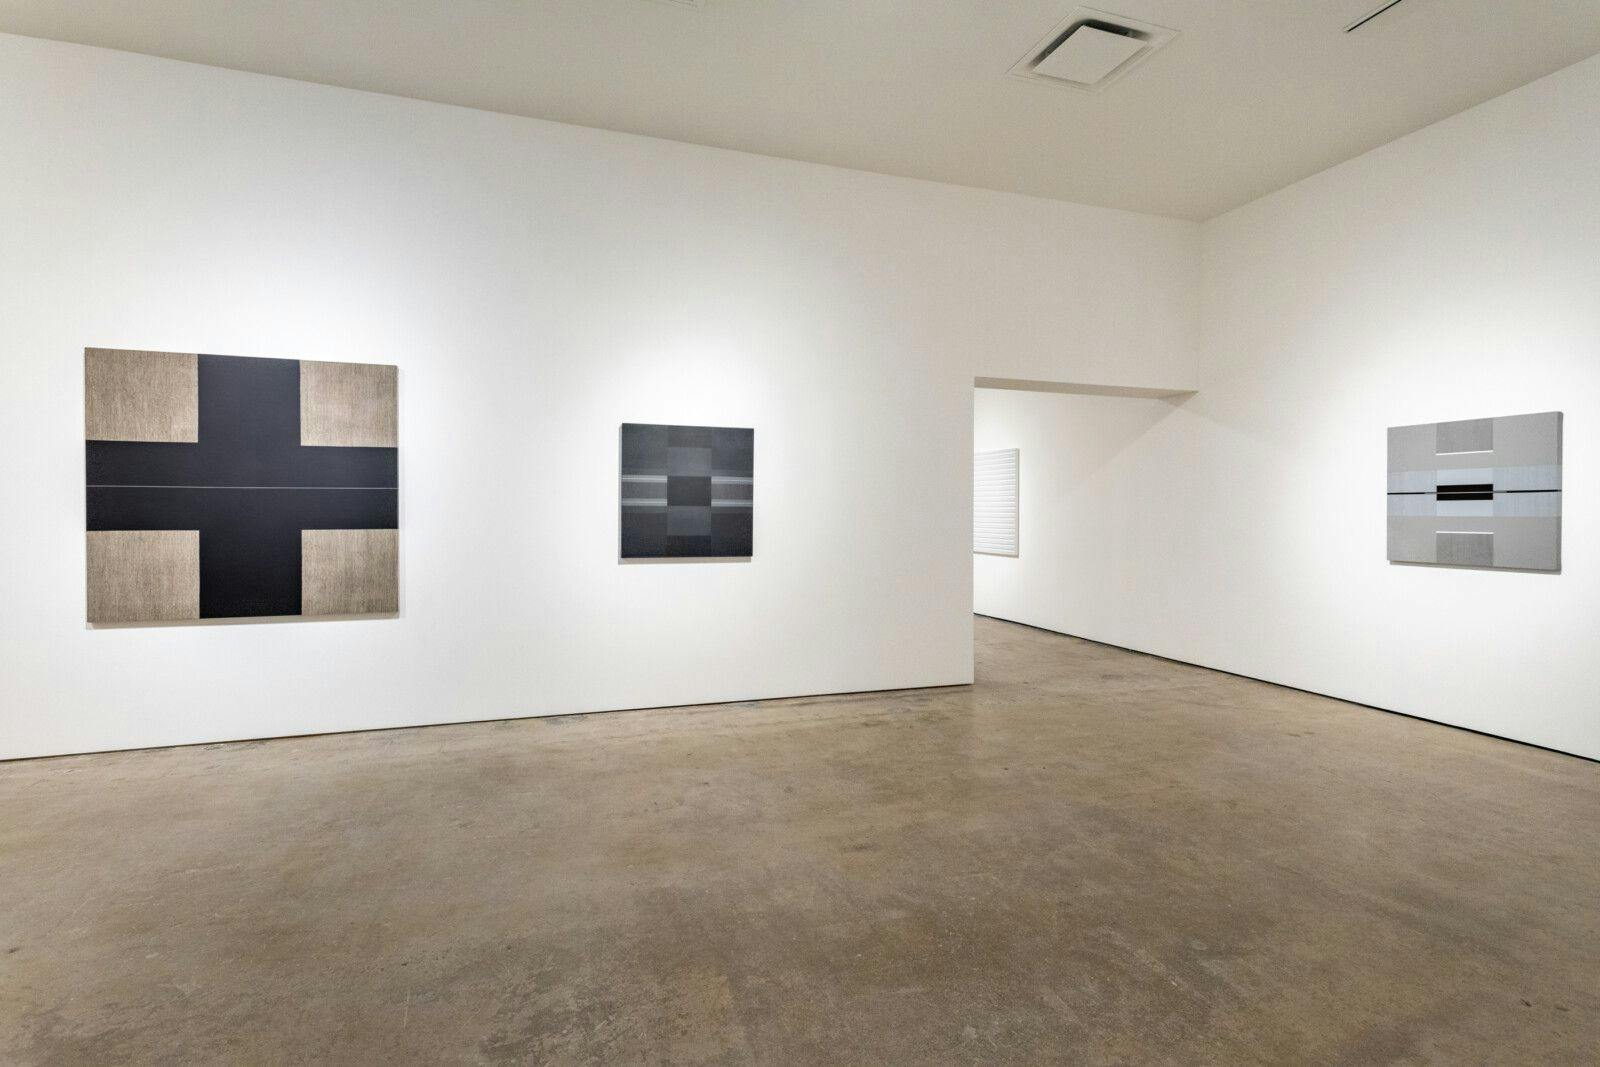 Max Cole: Endless Journey installed at SITE Santa Fe, photographed by Shayla Blatchford